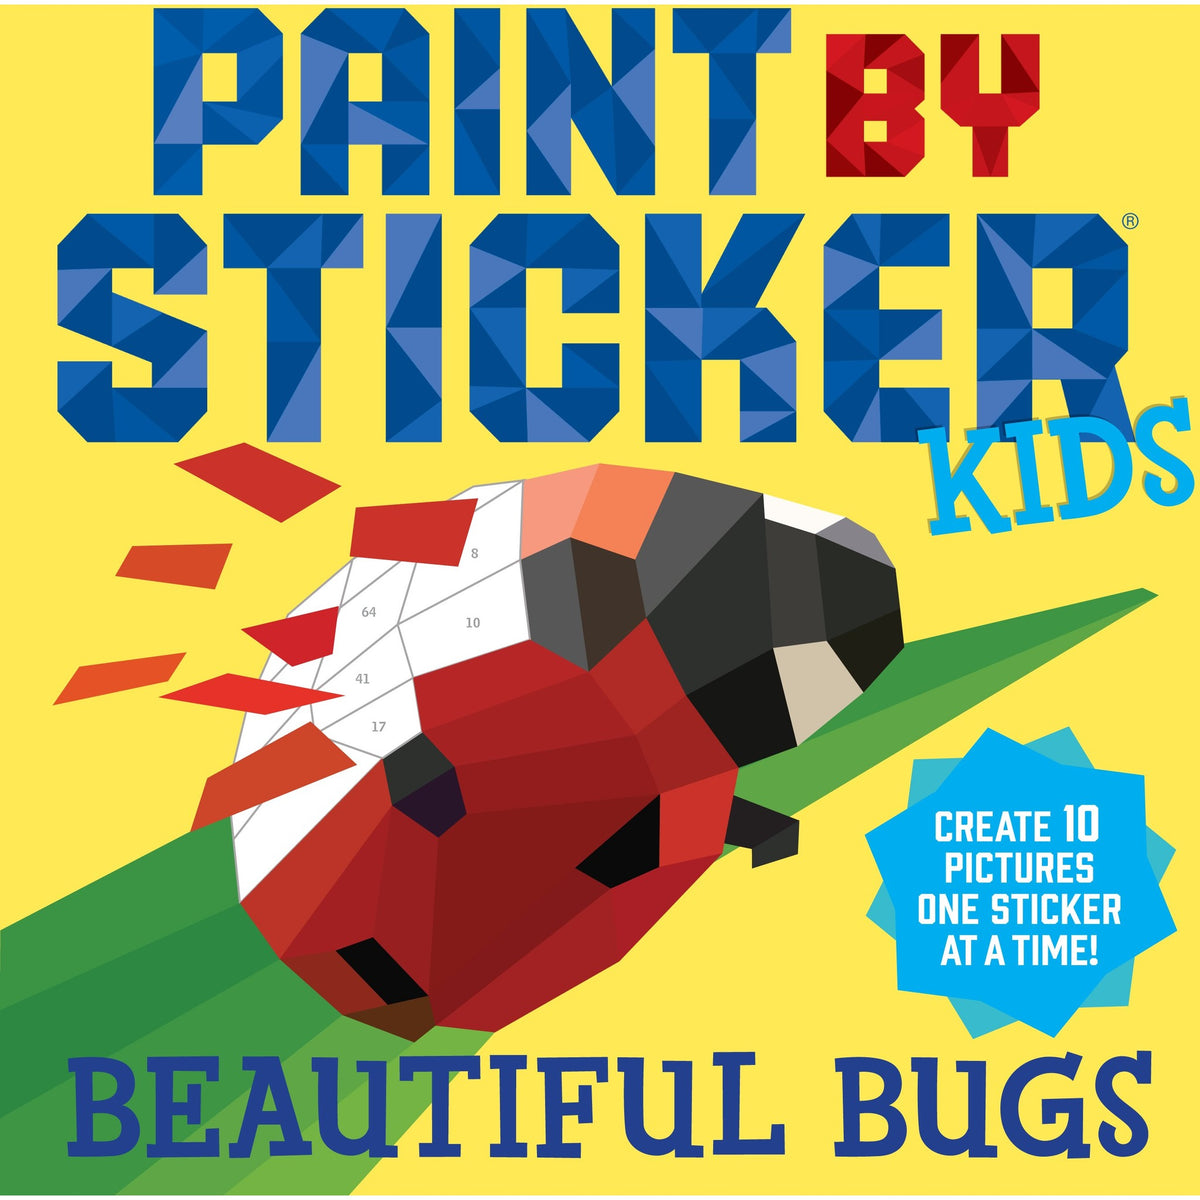 Paint By Sticker Kids Cover